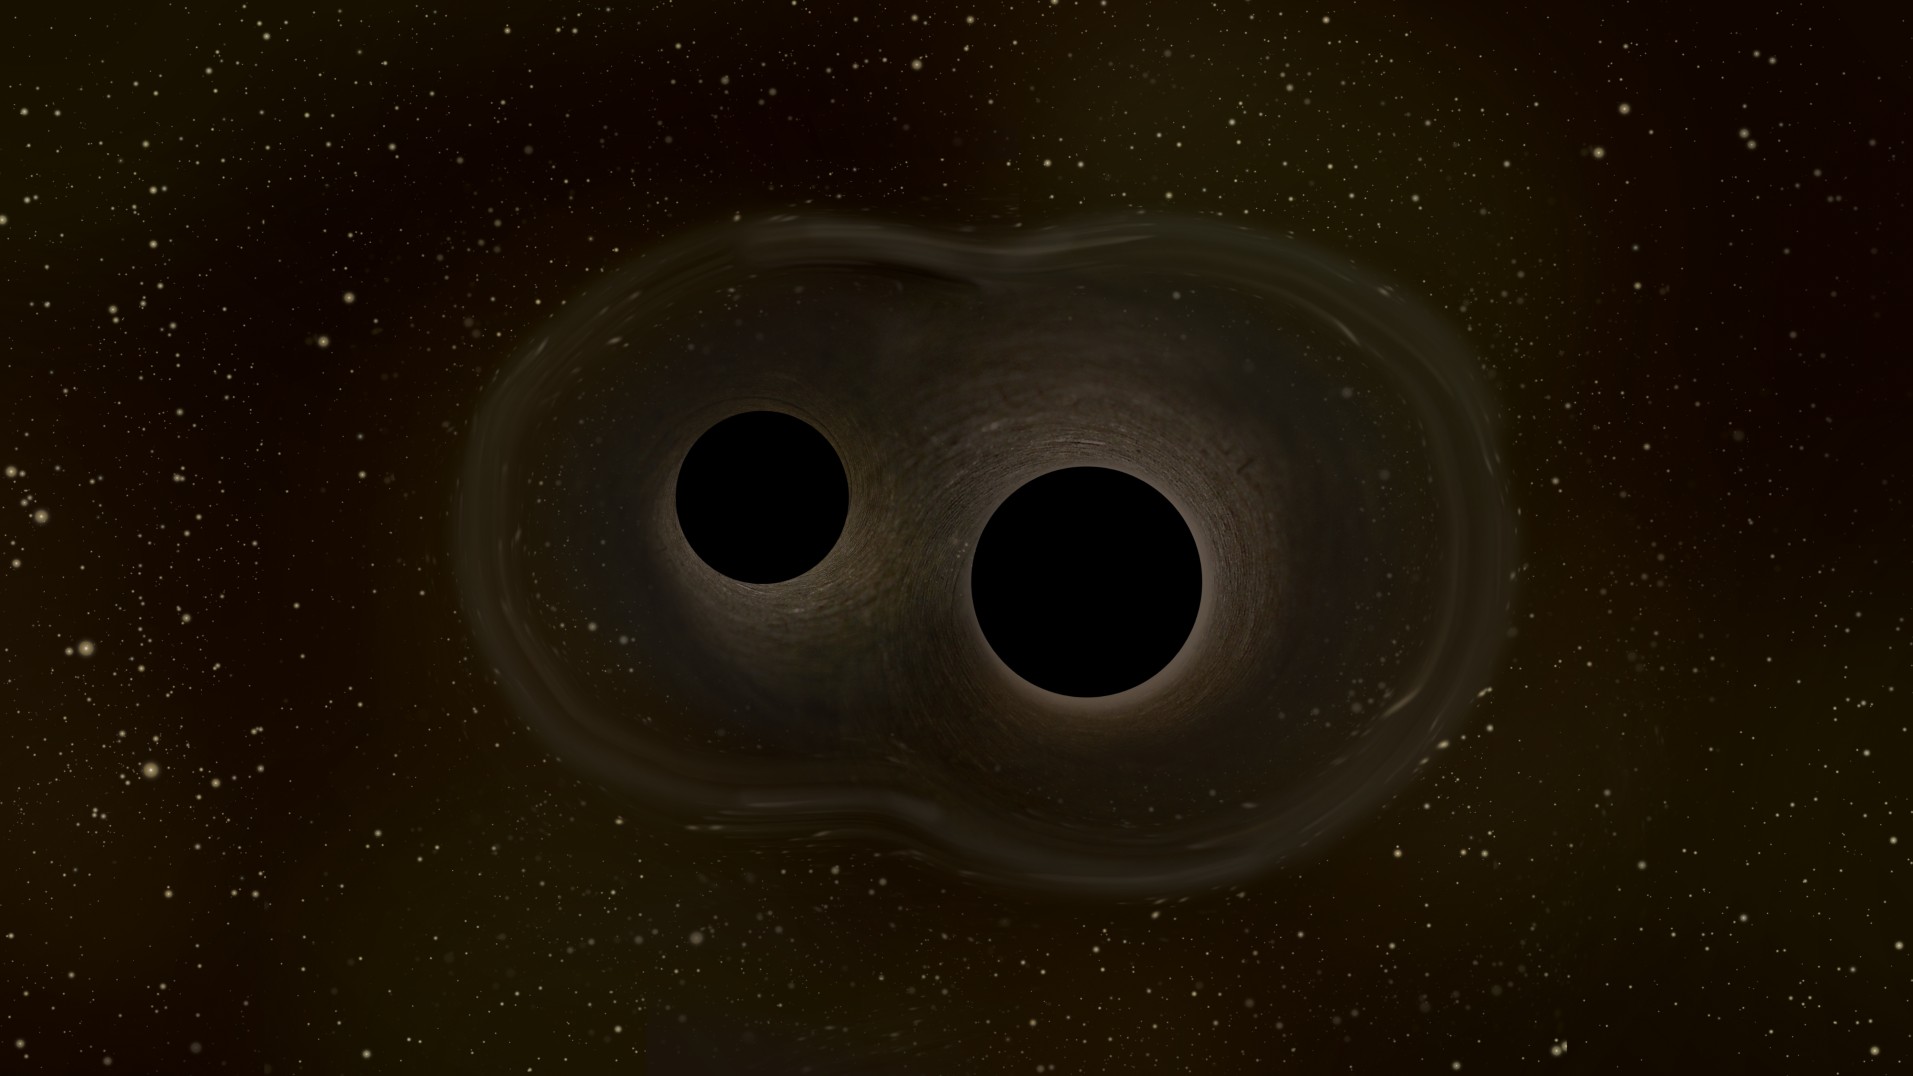 An illustration of two merging black holes.